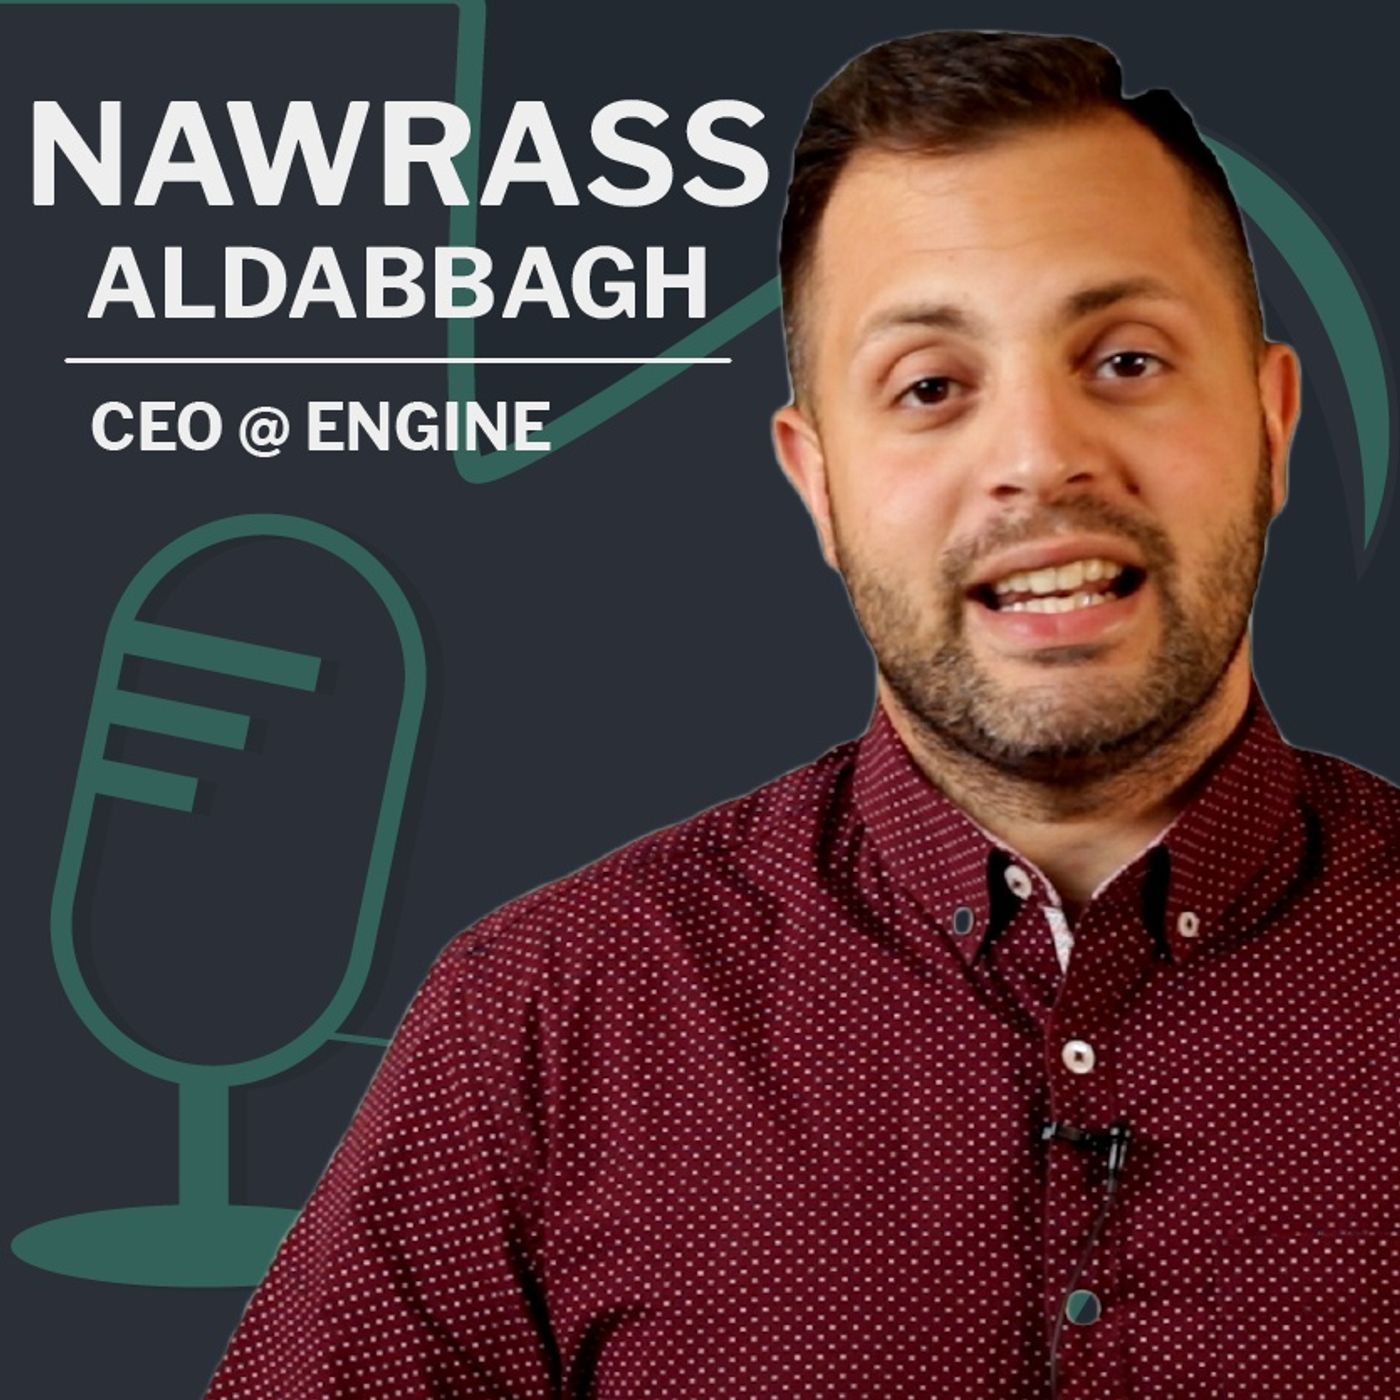 What is Practice Builder? w/ Nawrass Aldabbagh